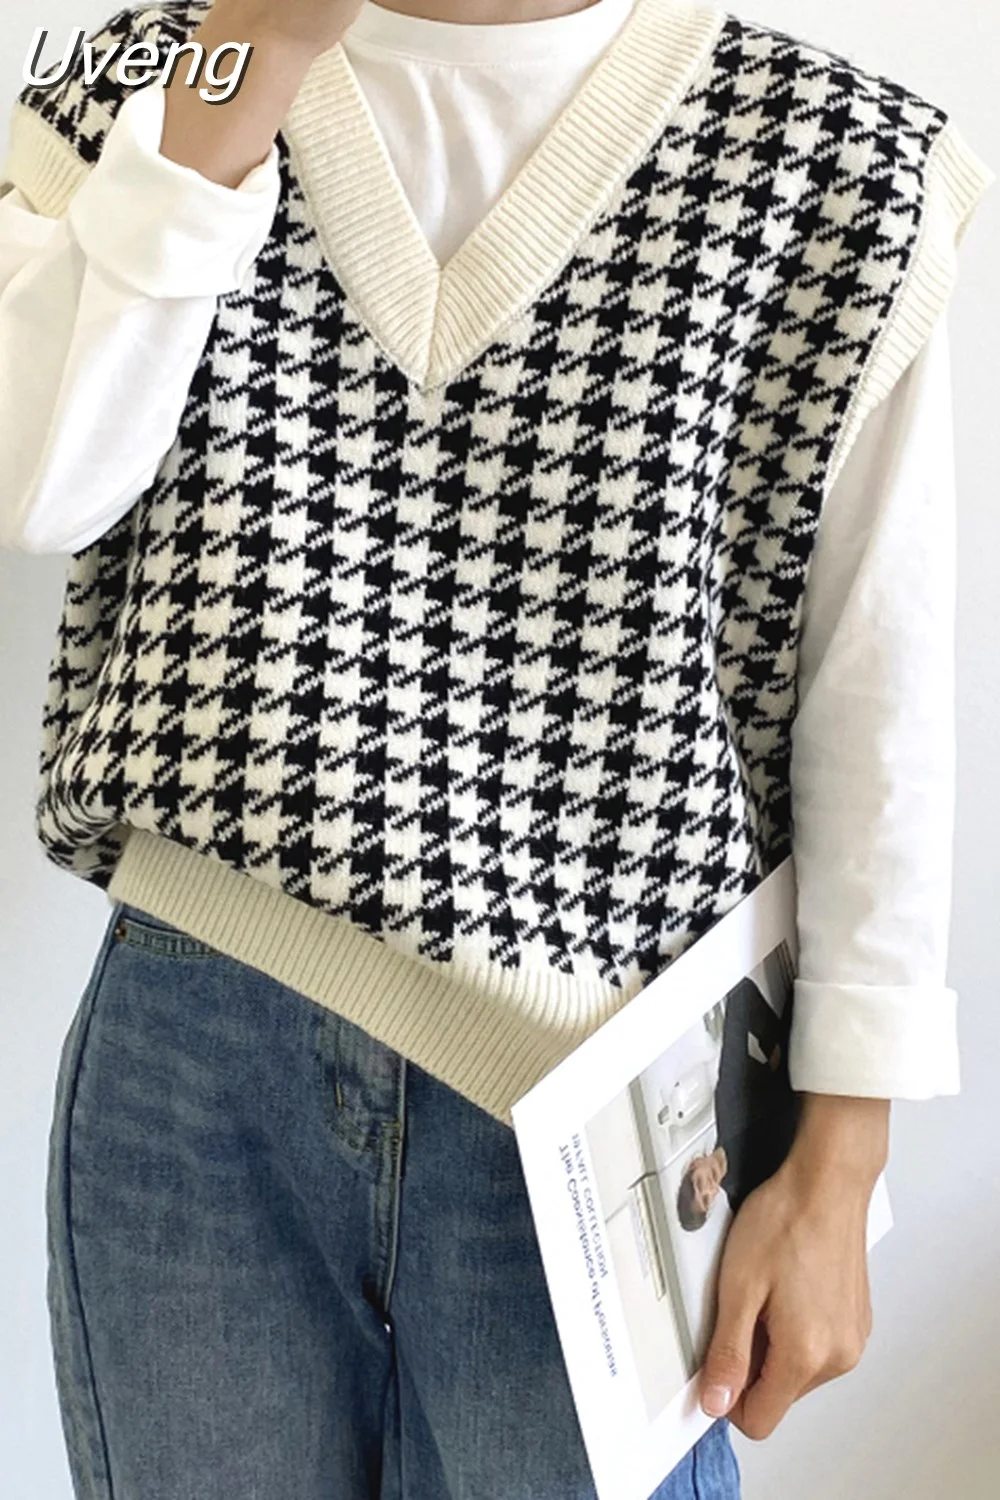 Uveng Women Plaid Sweater Vest Casual V Neck New Houndstooth Loose Thick Female Knitted Sweater Korean Elegant Tops